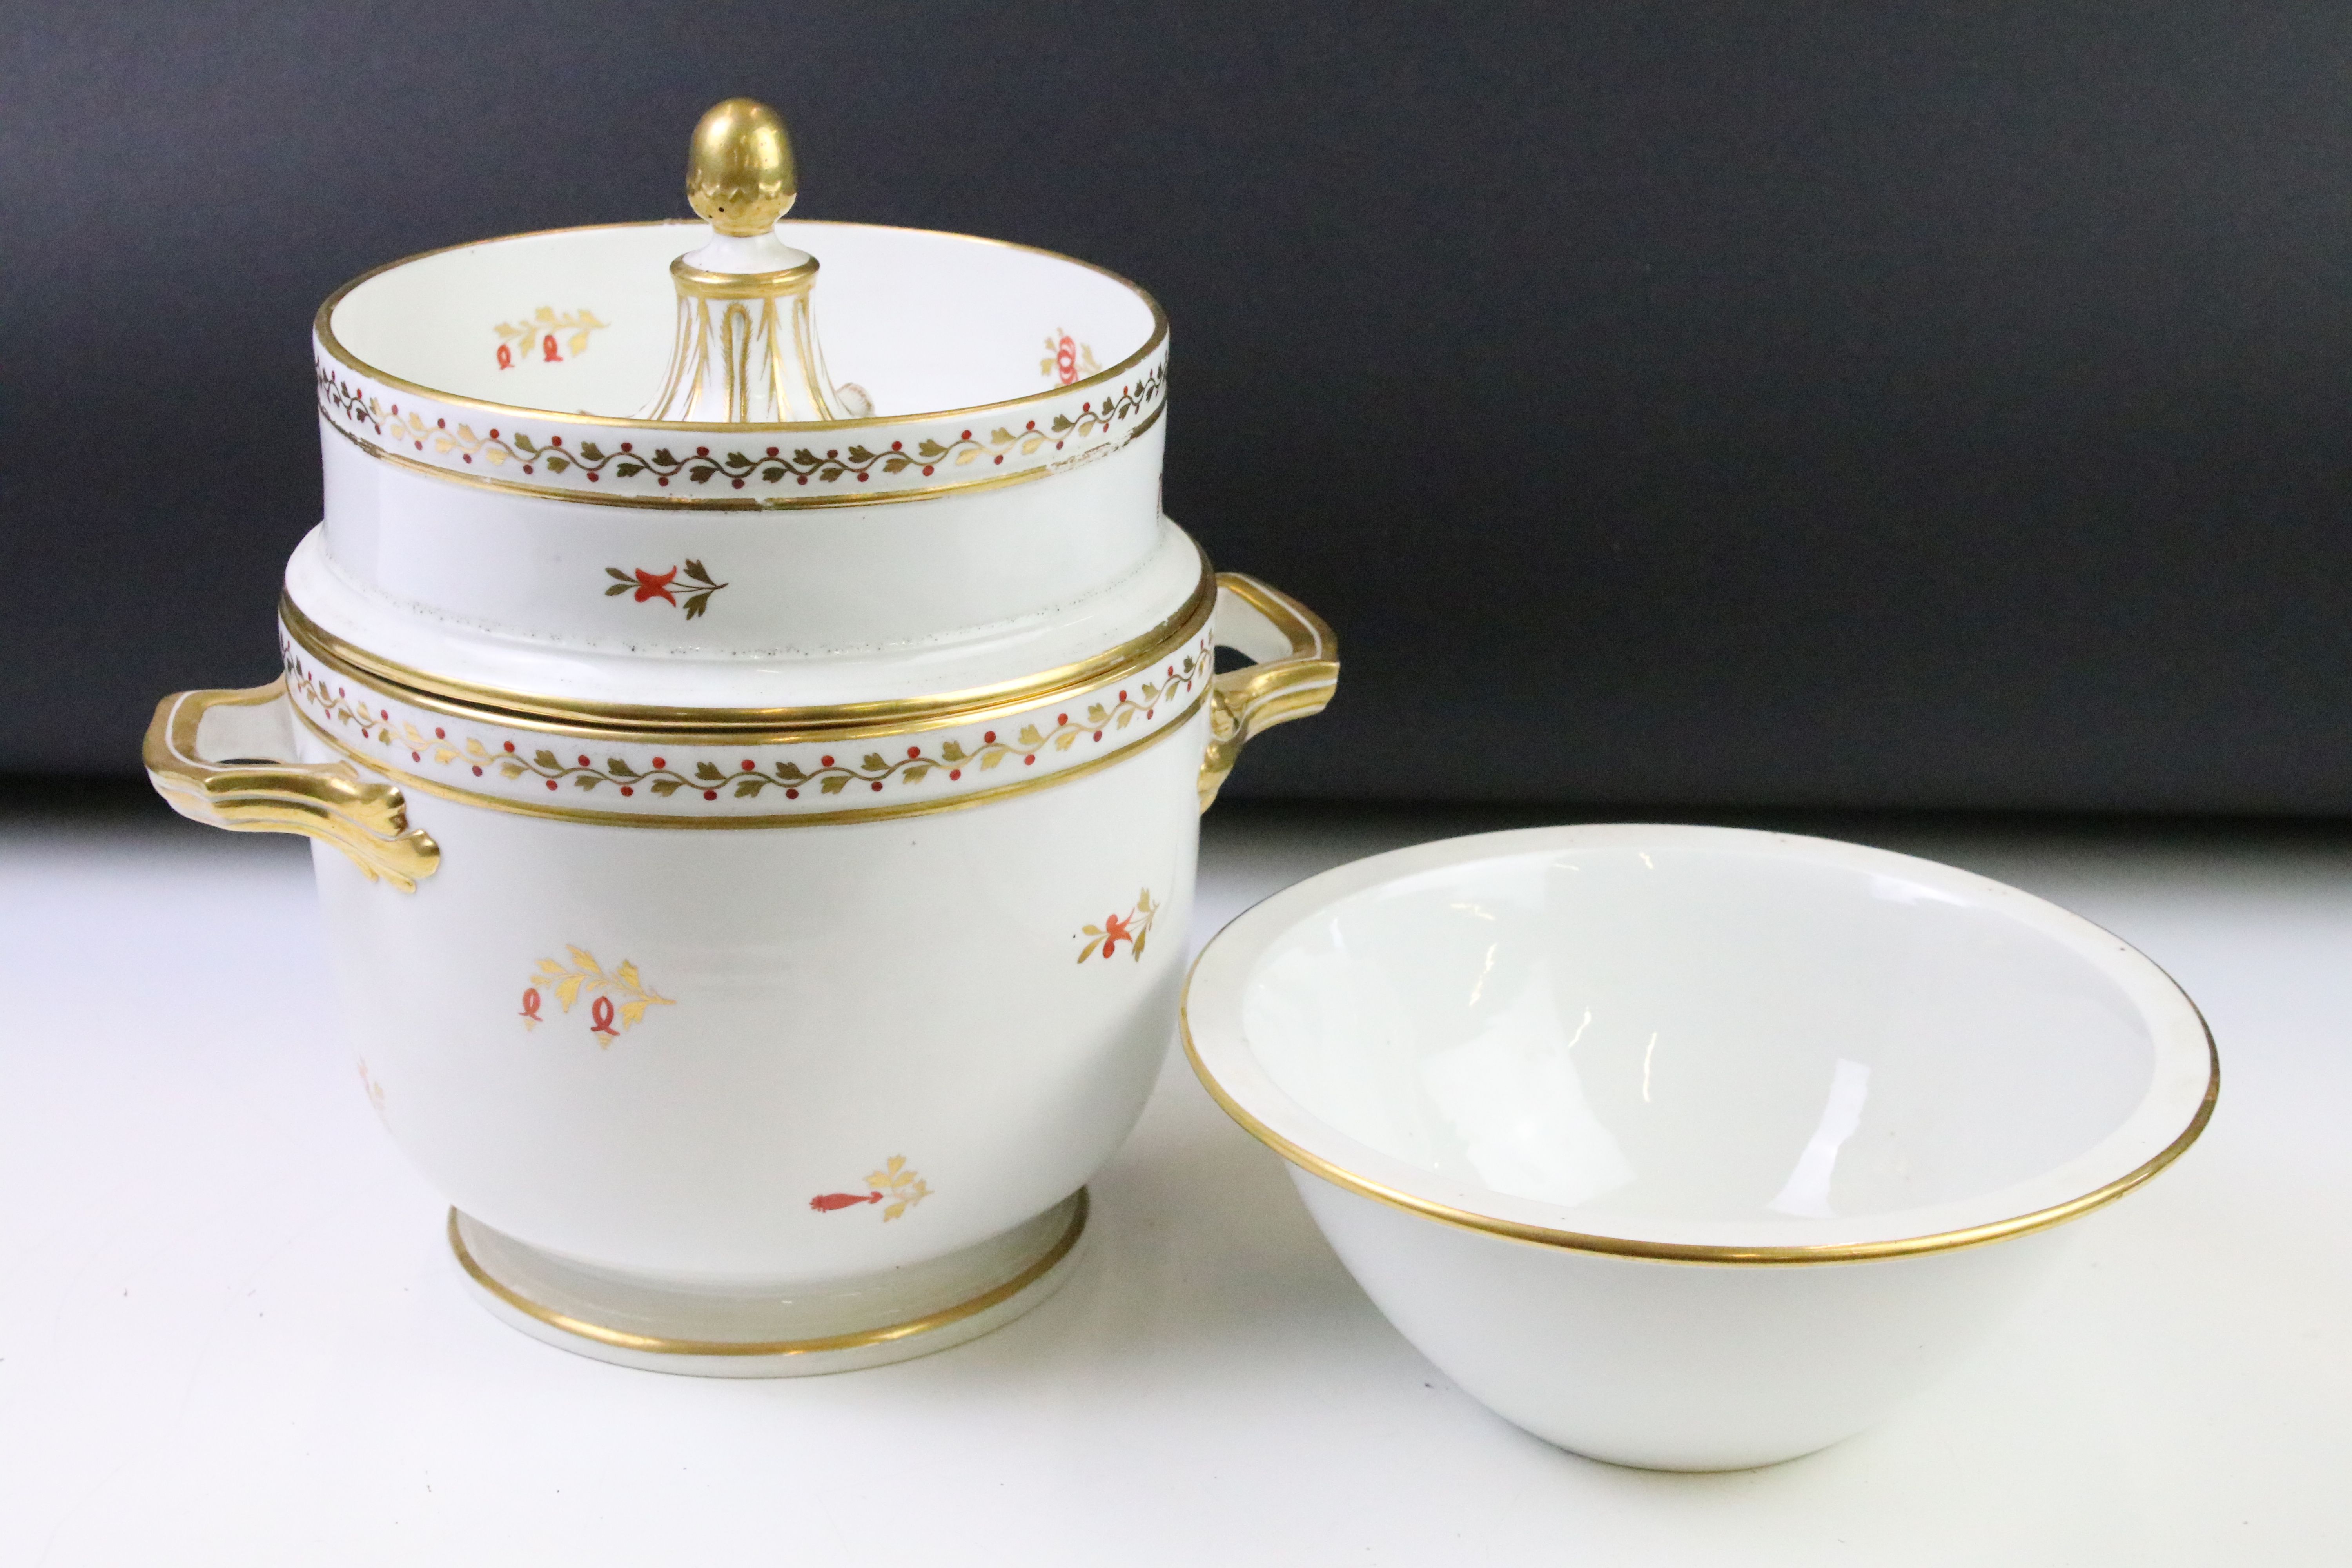 Late 18th / early 19th Century Crown Derby ice pail and cover having twin handles, gilt detailing of